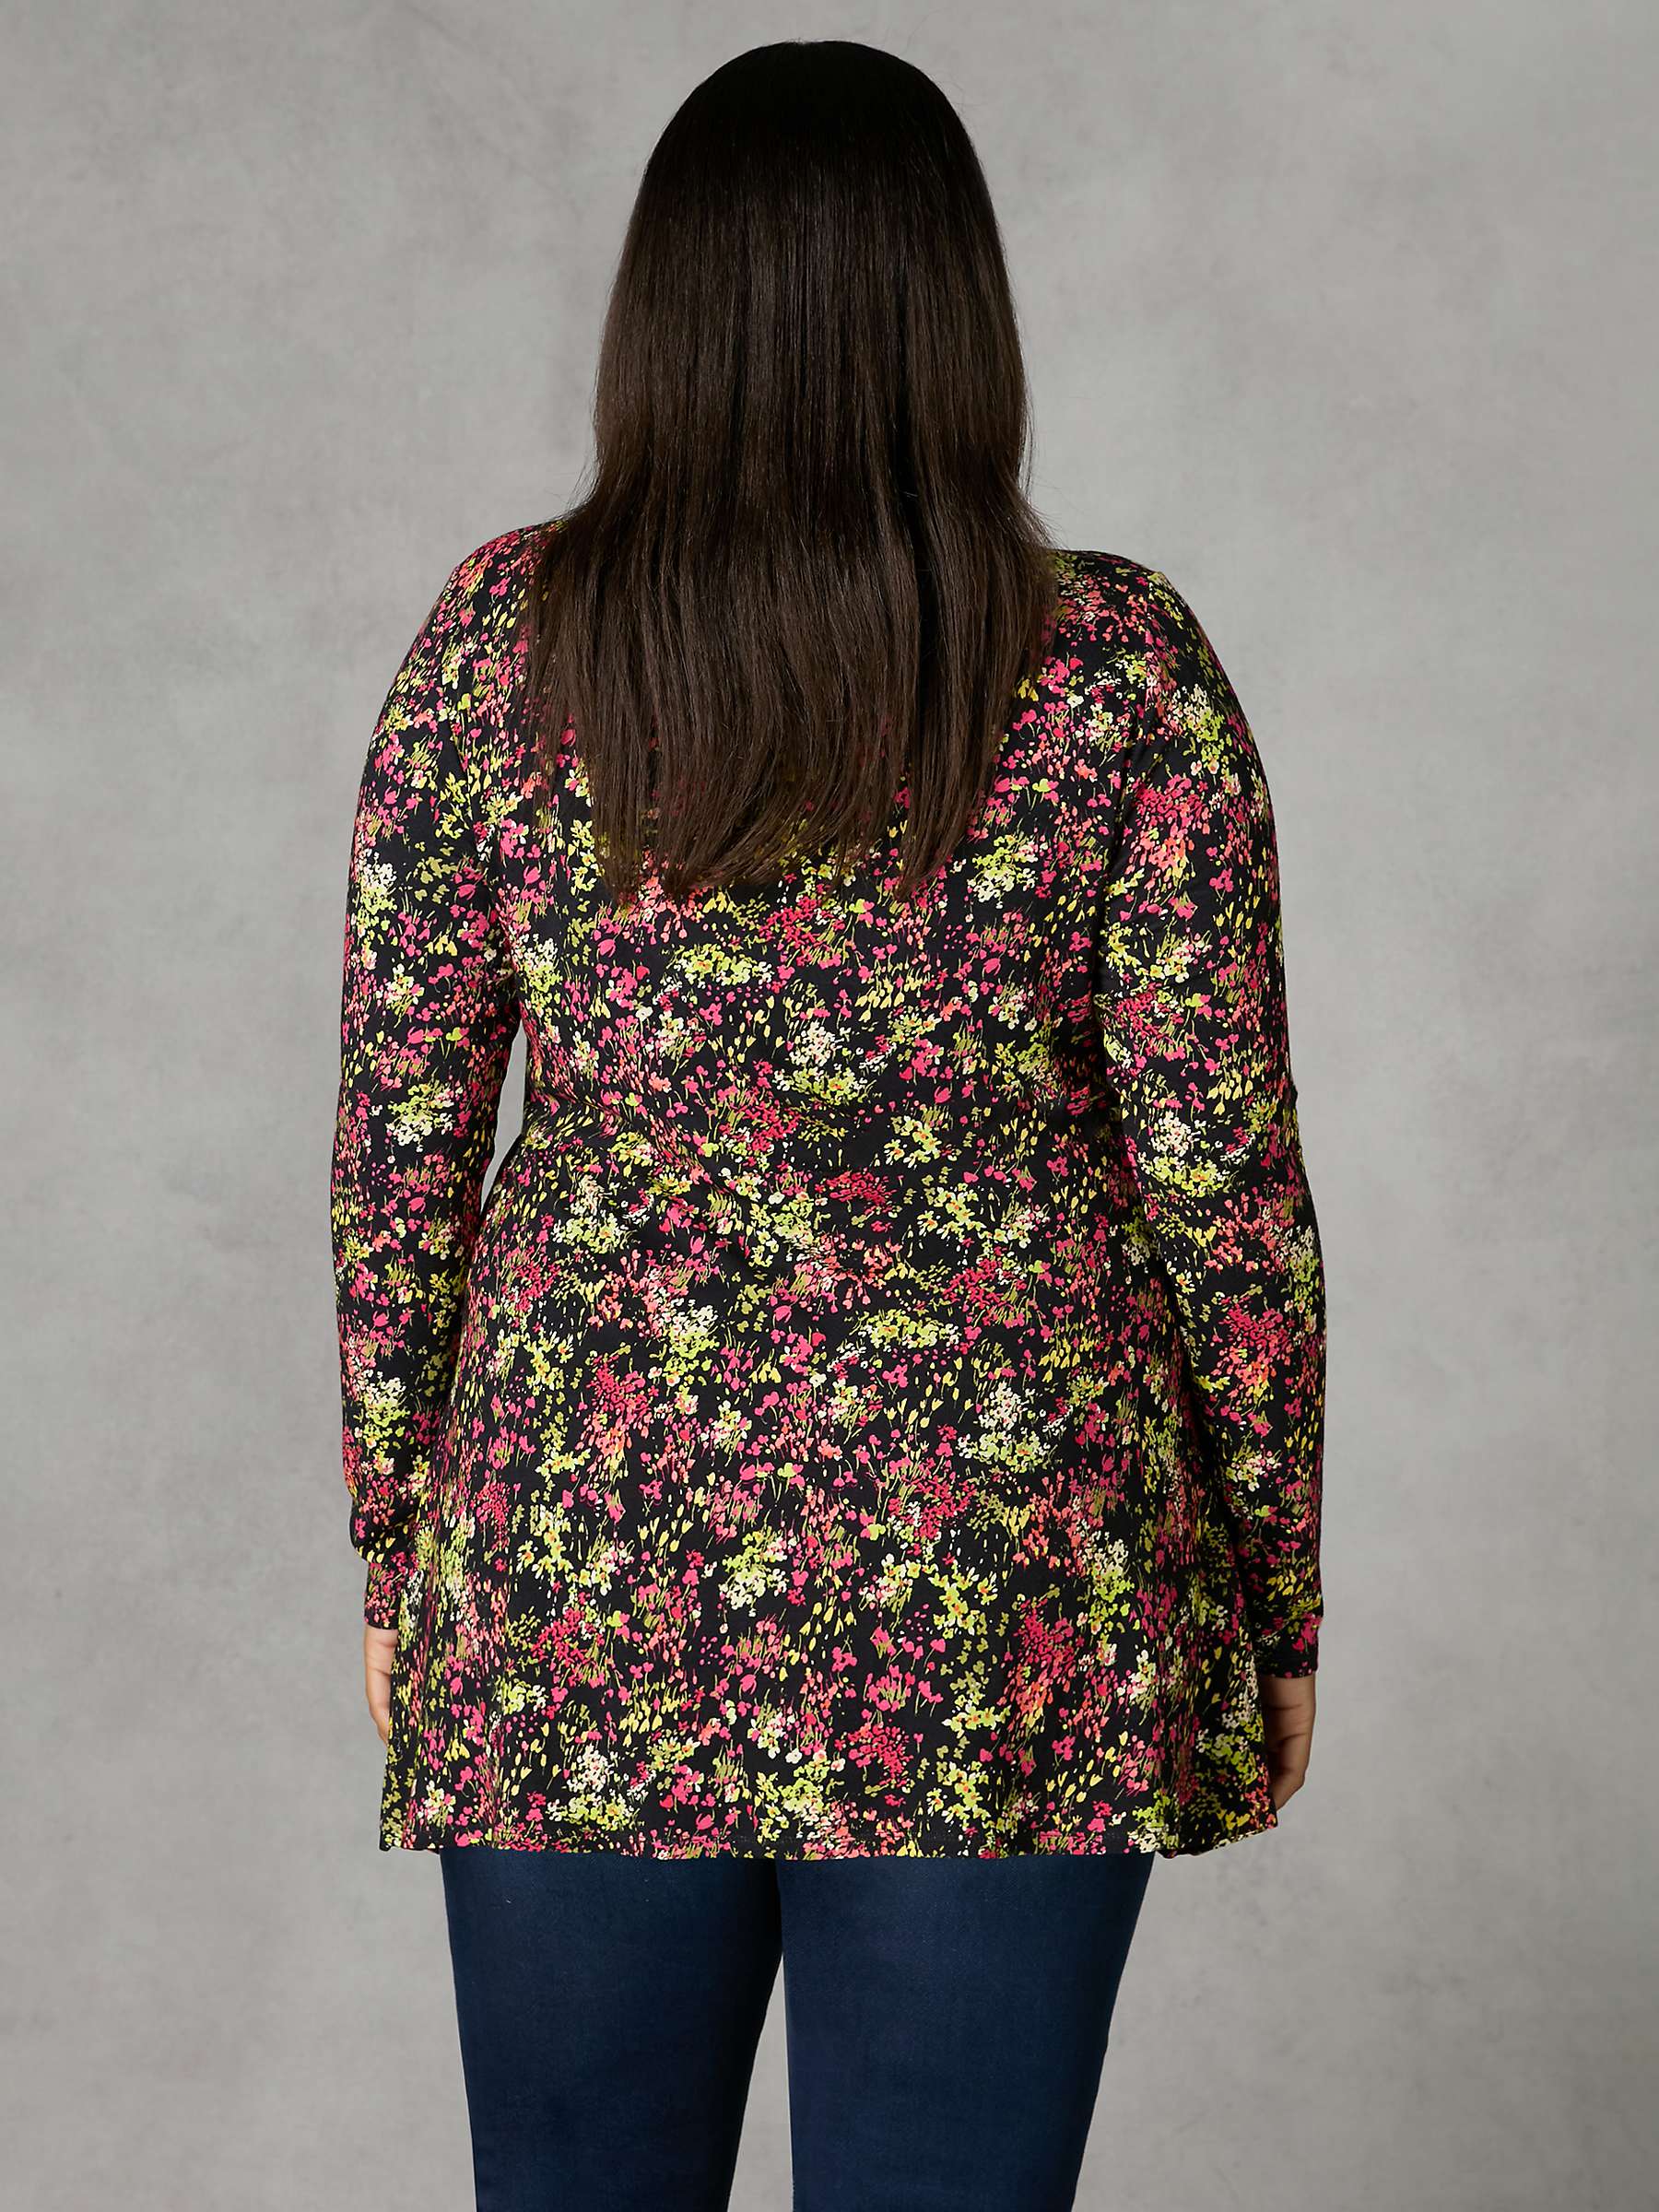 Buy Live Unlimited Curve Ditsy Print Empire Seam Top, Black/Multi Online at johnlewis.com